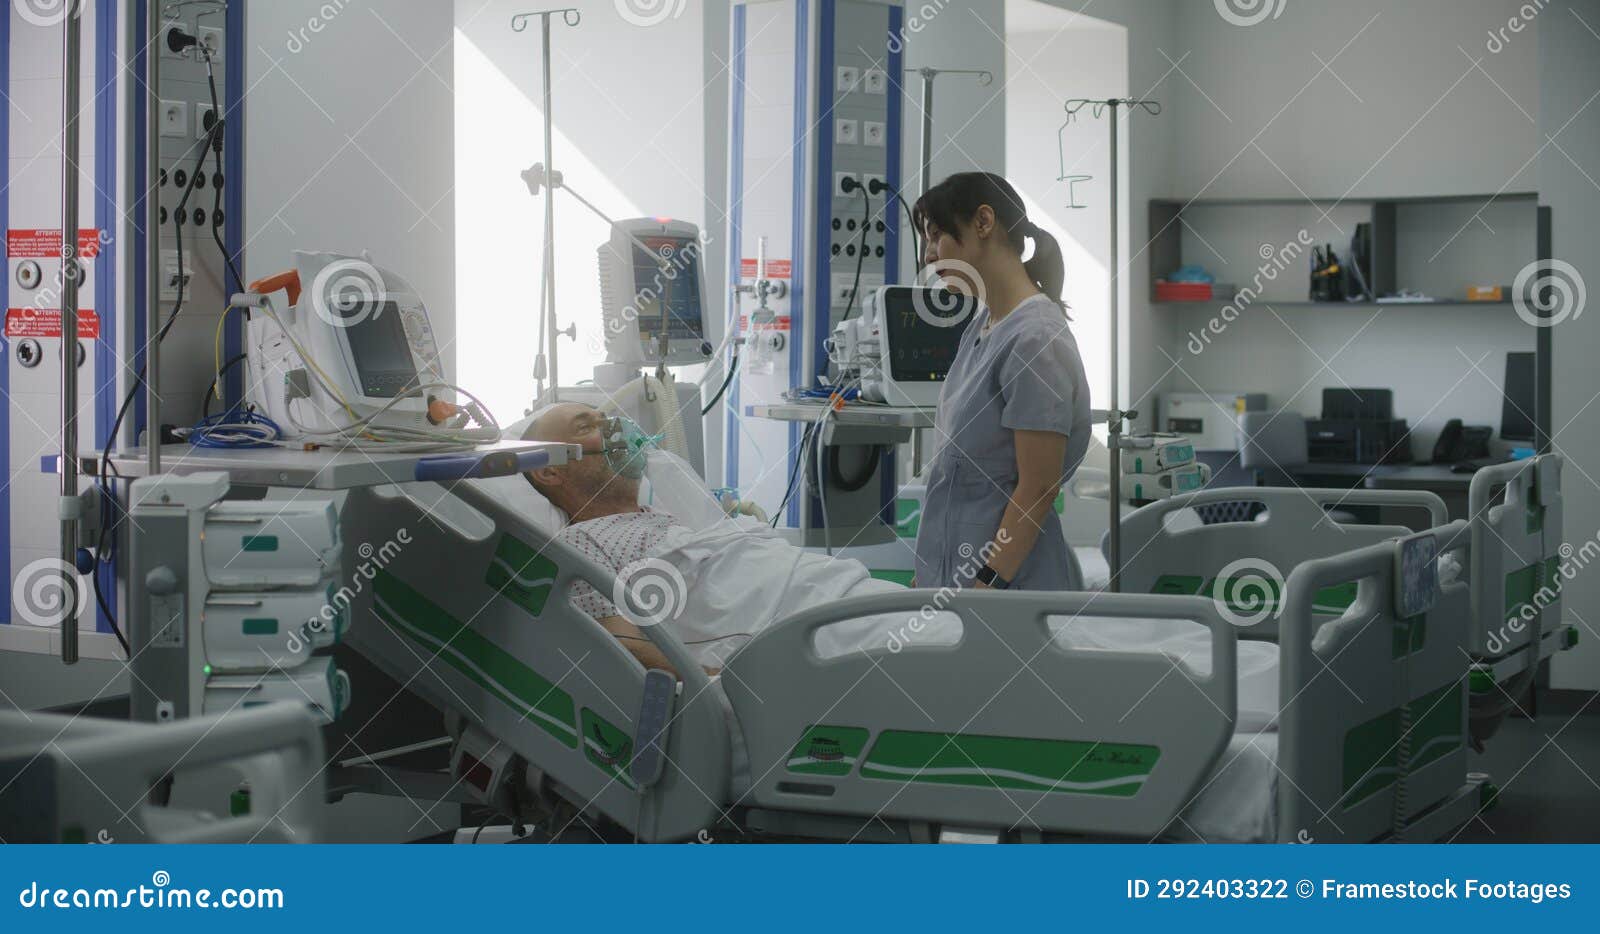 Friendly Nurse Adjusts Life Support Machine for Old Patient Stock Photo ...